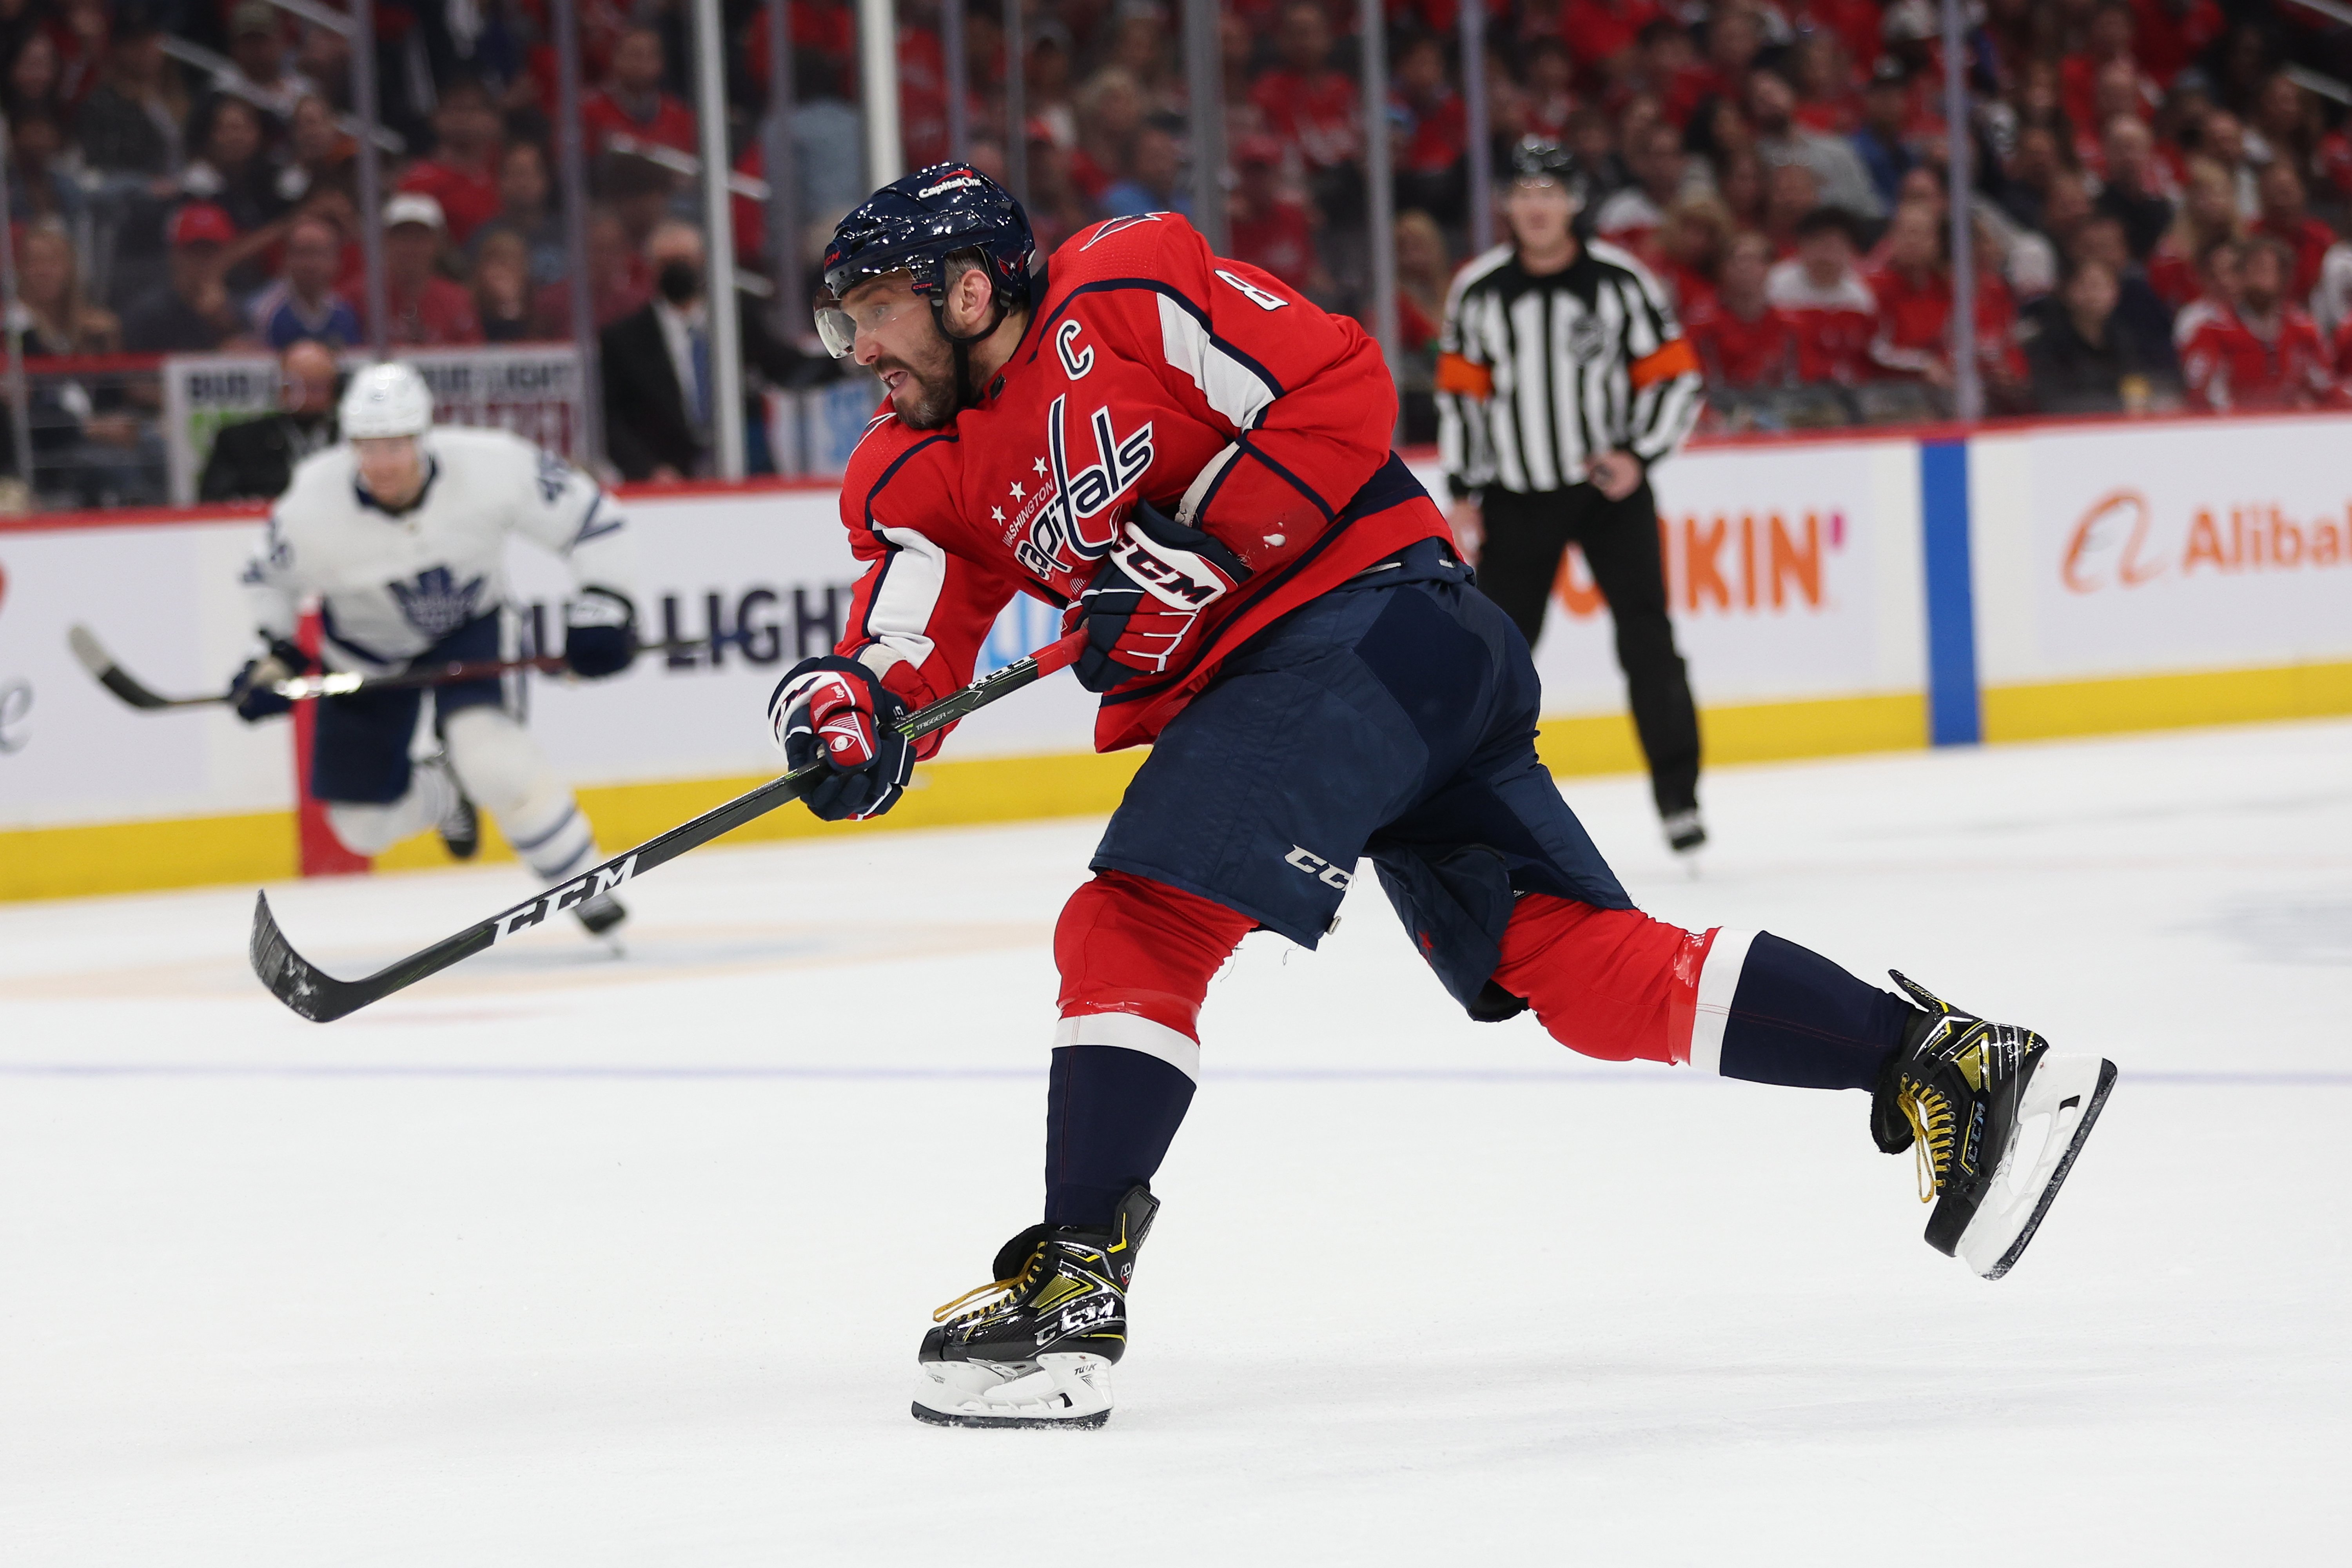 Alex Ovechkin of the Washington Capitals shoots against the Toronto Maple Leafs at Capital One Arena on April 24, 2022 in Washington, DC.